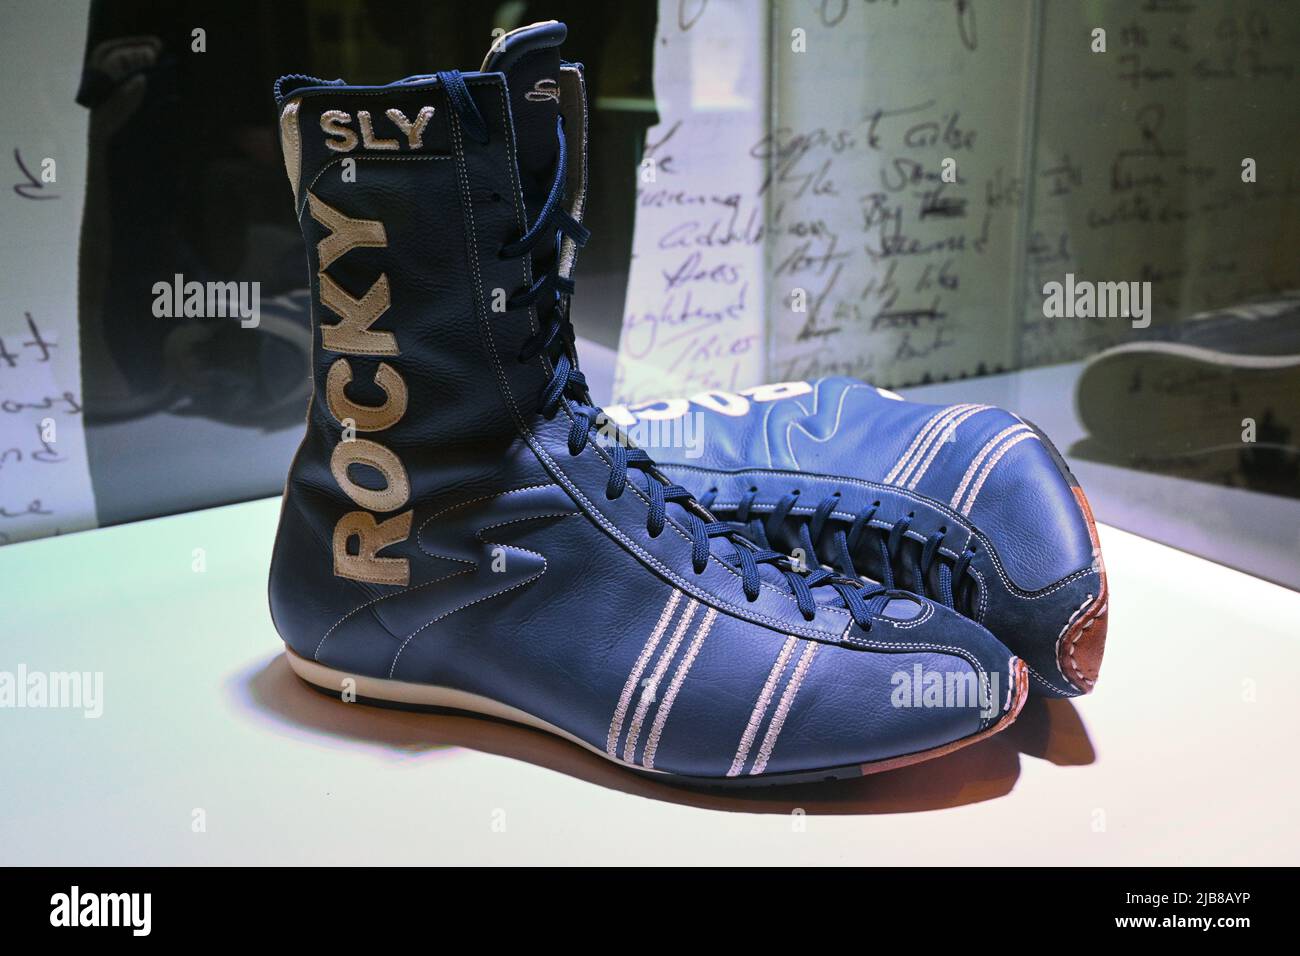 Sylvester Stallone's Rocky Balboa Boxing Shoes on display as part of the  The Jim Irsay Collection at Manhattan Center's Hammerstein Ballroom on June  3 Stock Photo - Alamy